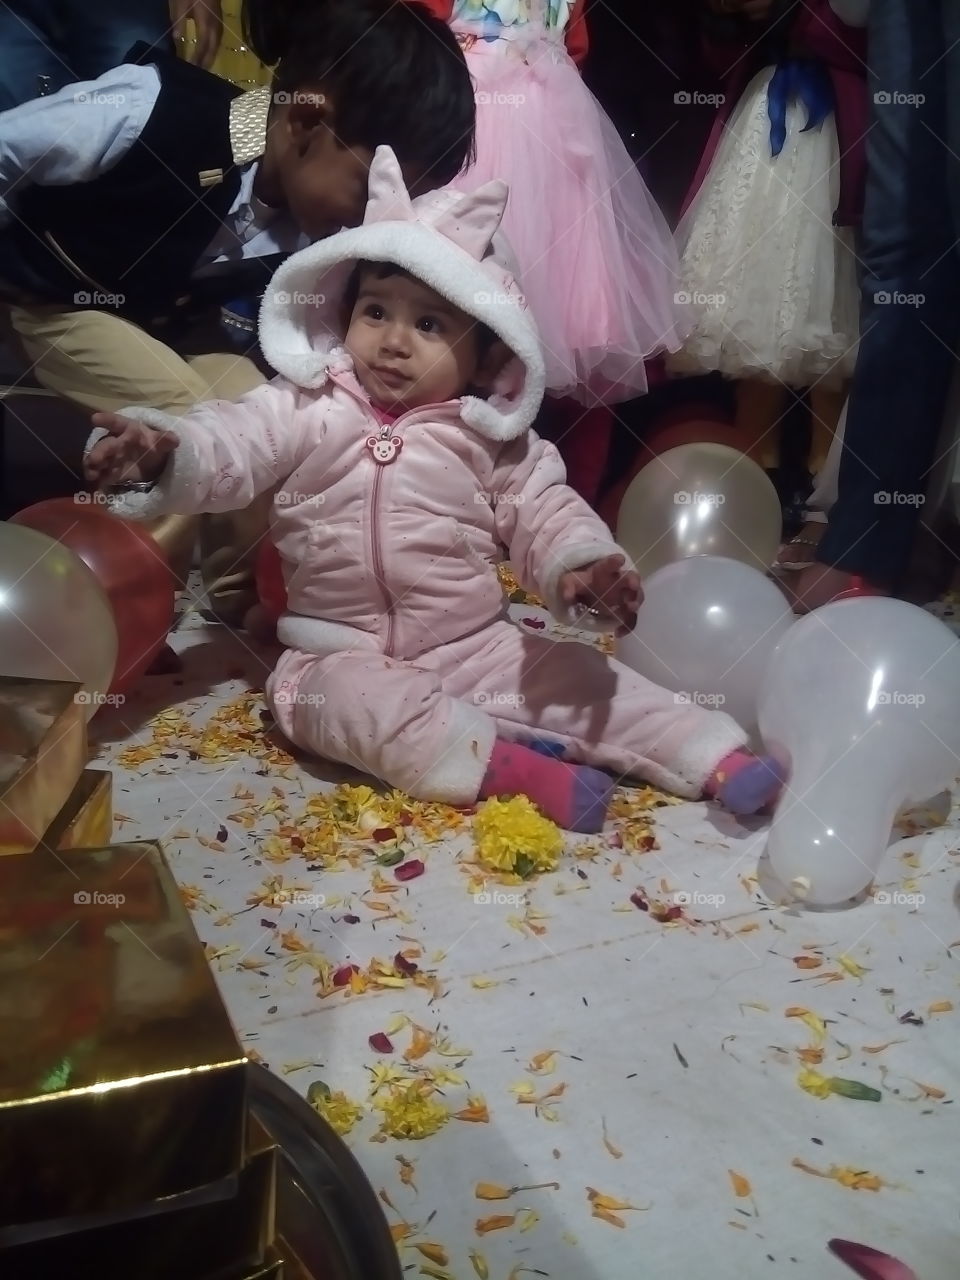 curious baby enjoying party